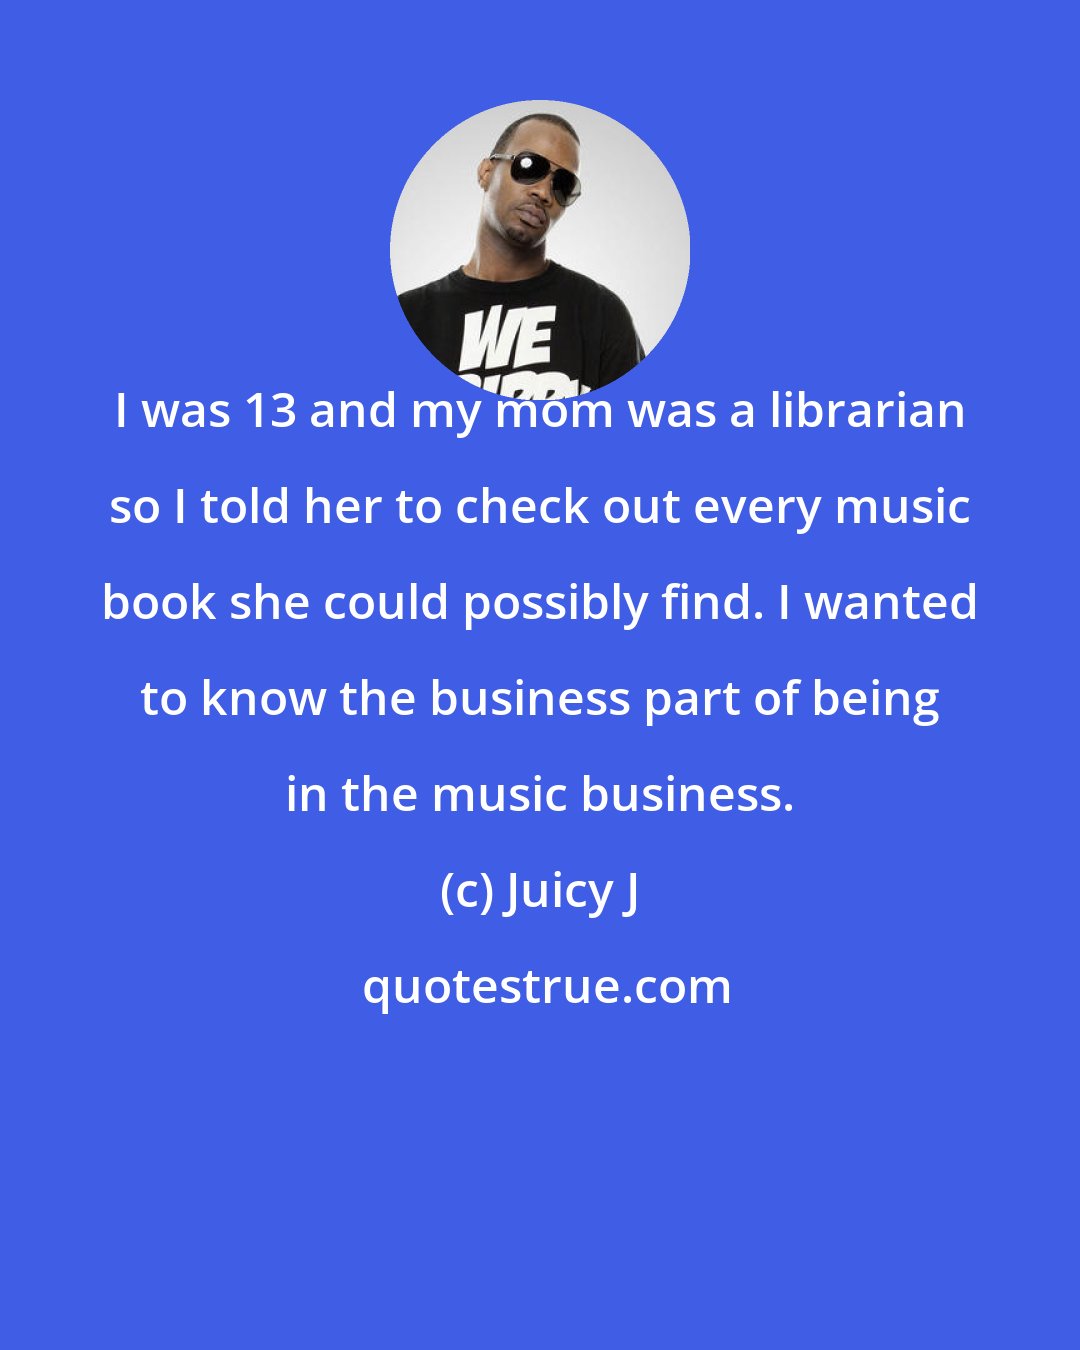 Juicy J: I was 13 and my mom was a librarian so I told her to check out every music book she could possibly find. I wanted to know the business part of being in the music business.